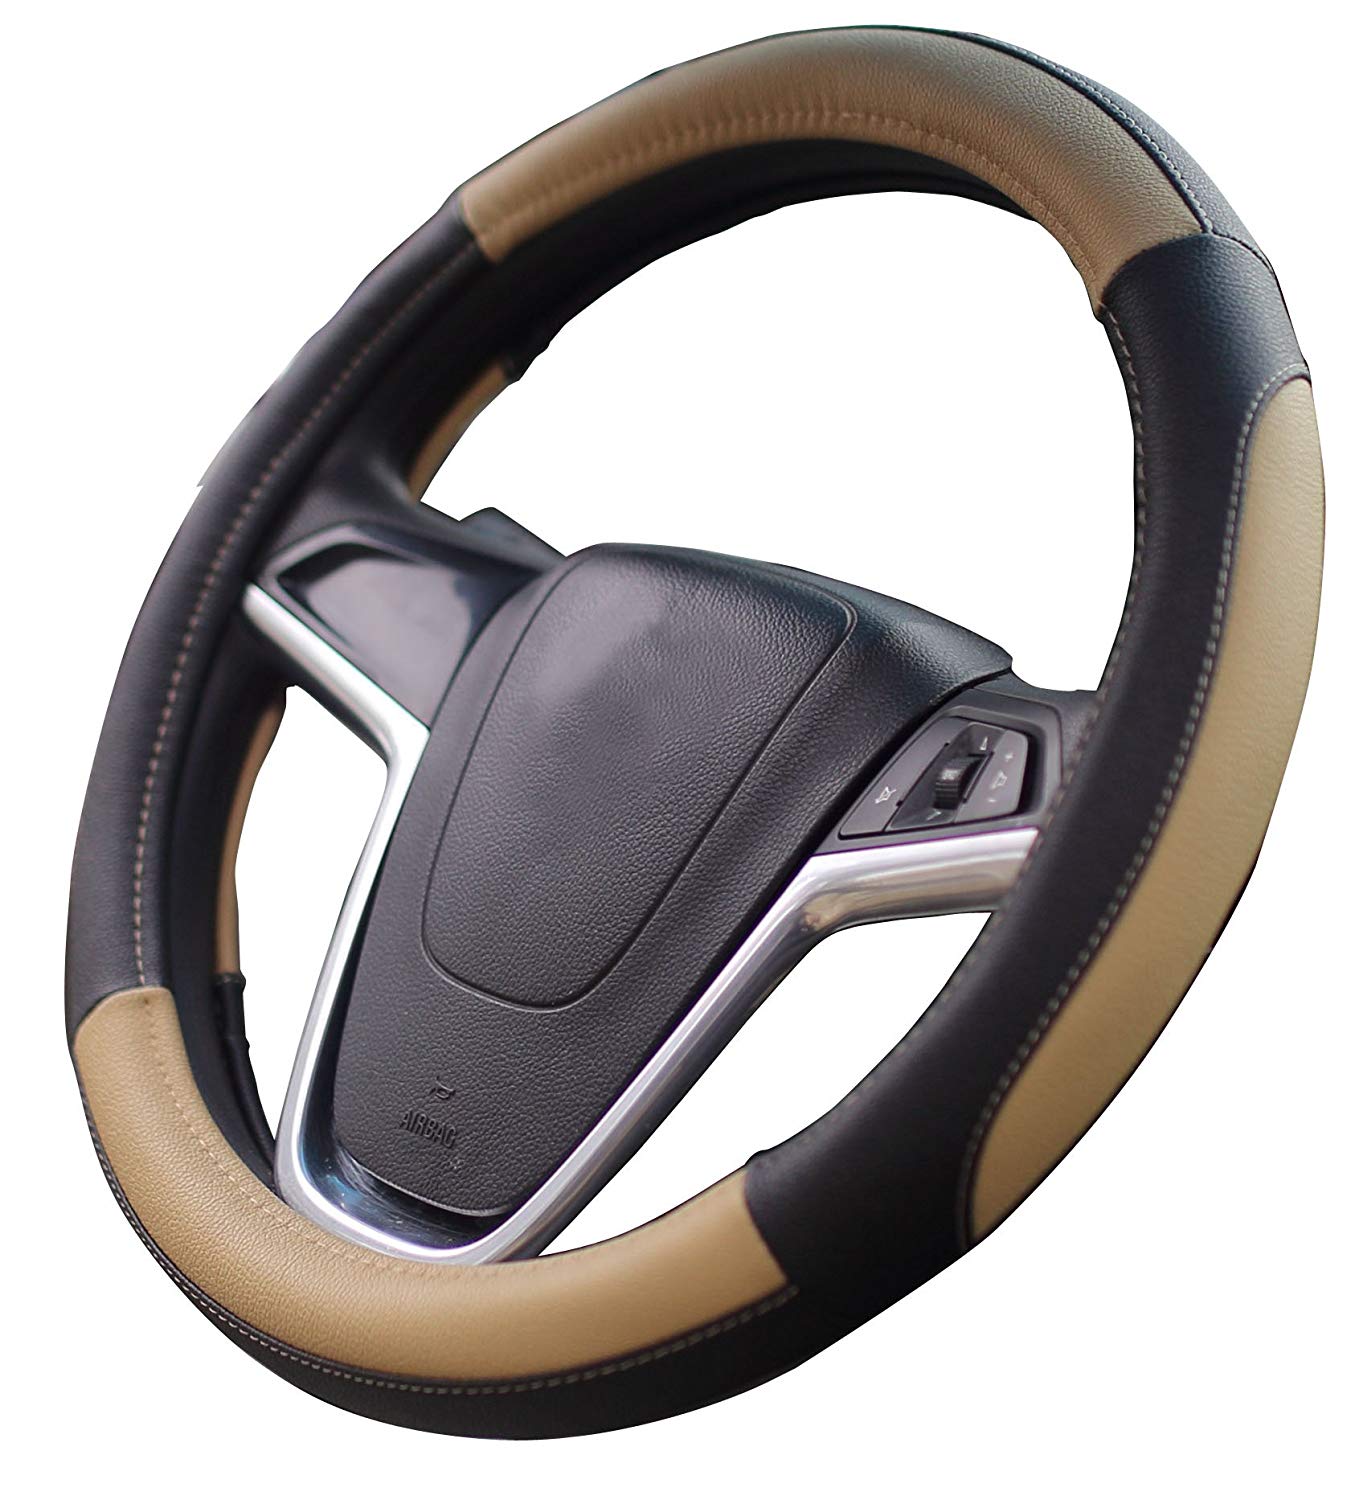 Mayco Bell Car Steering Wheel Cover 15 inch No Smell Comfort Durability Safety (Black Beige)